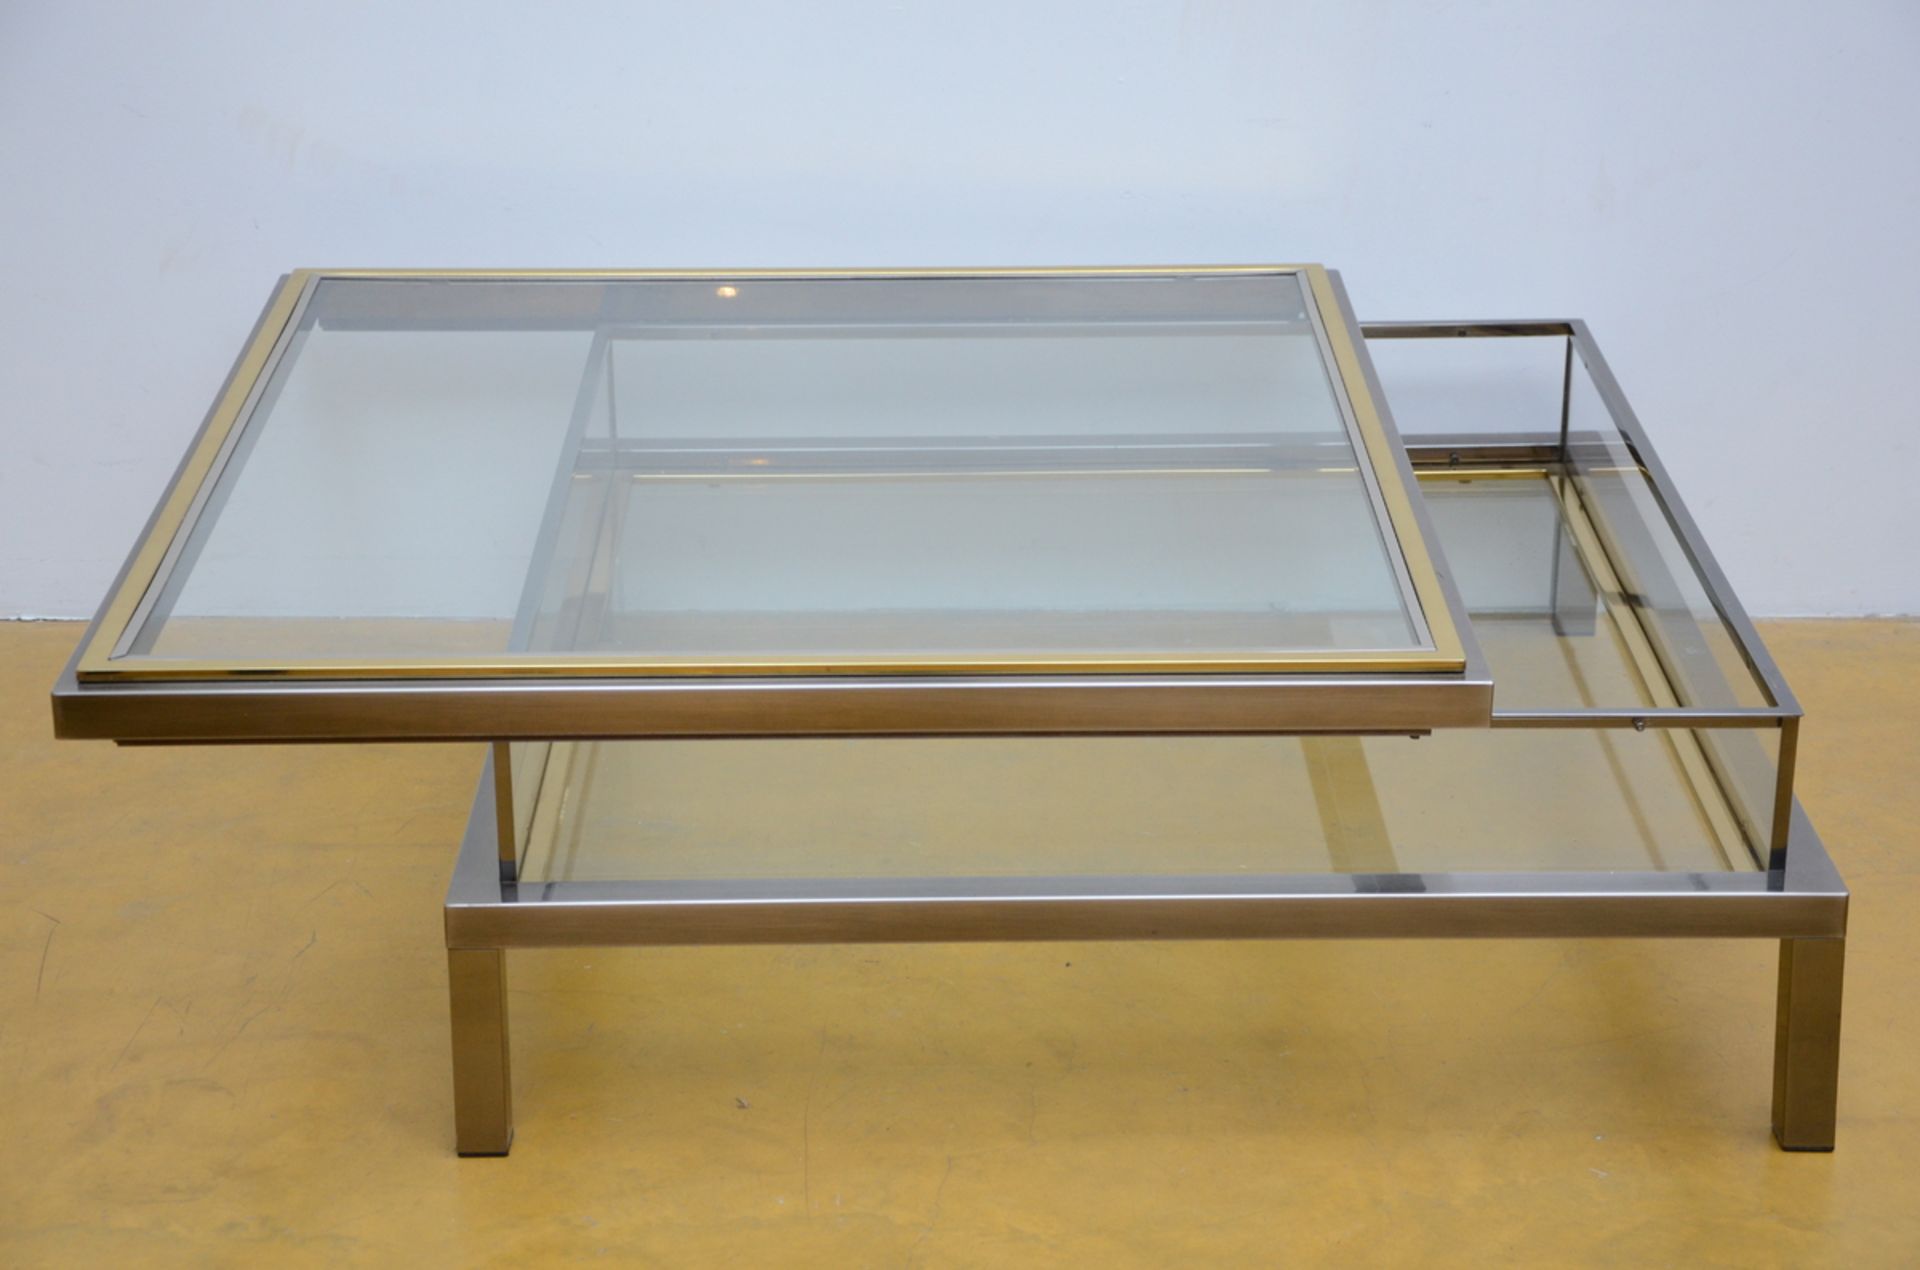 Belgachrome coffee table (h42x108x108cm), 2 tables (h42x68x48cm) and lamp (total h91cm) - Image 3 of 4